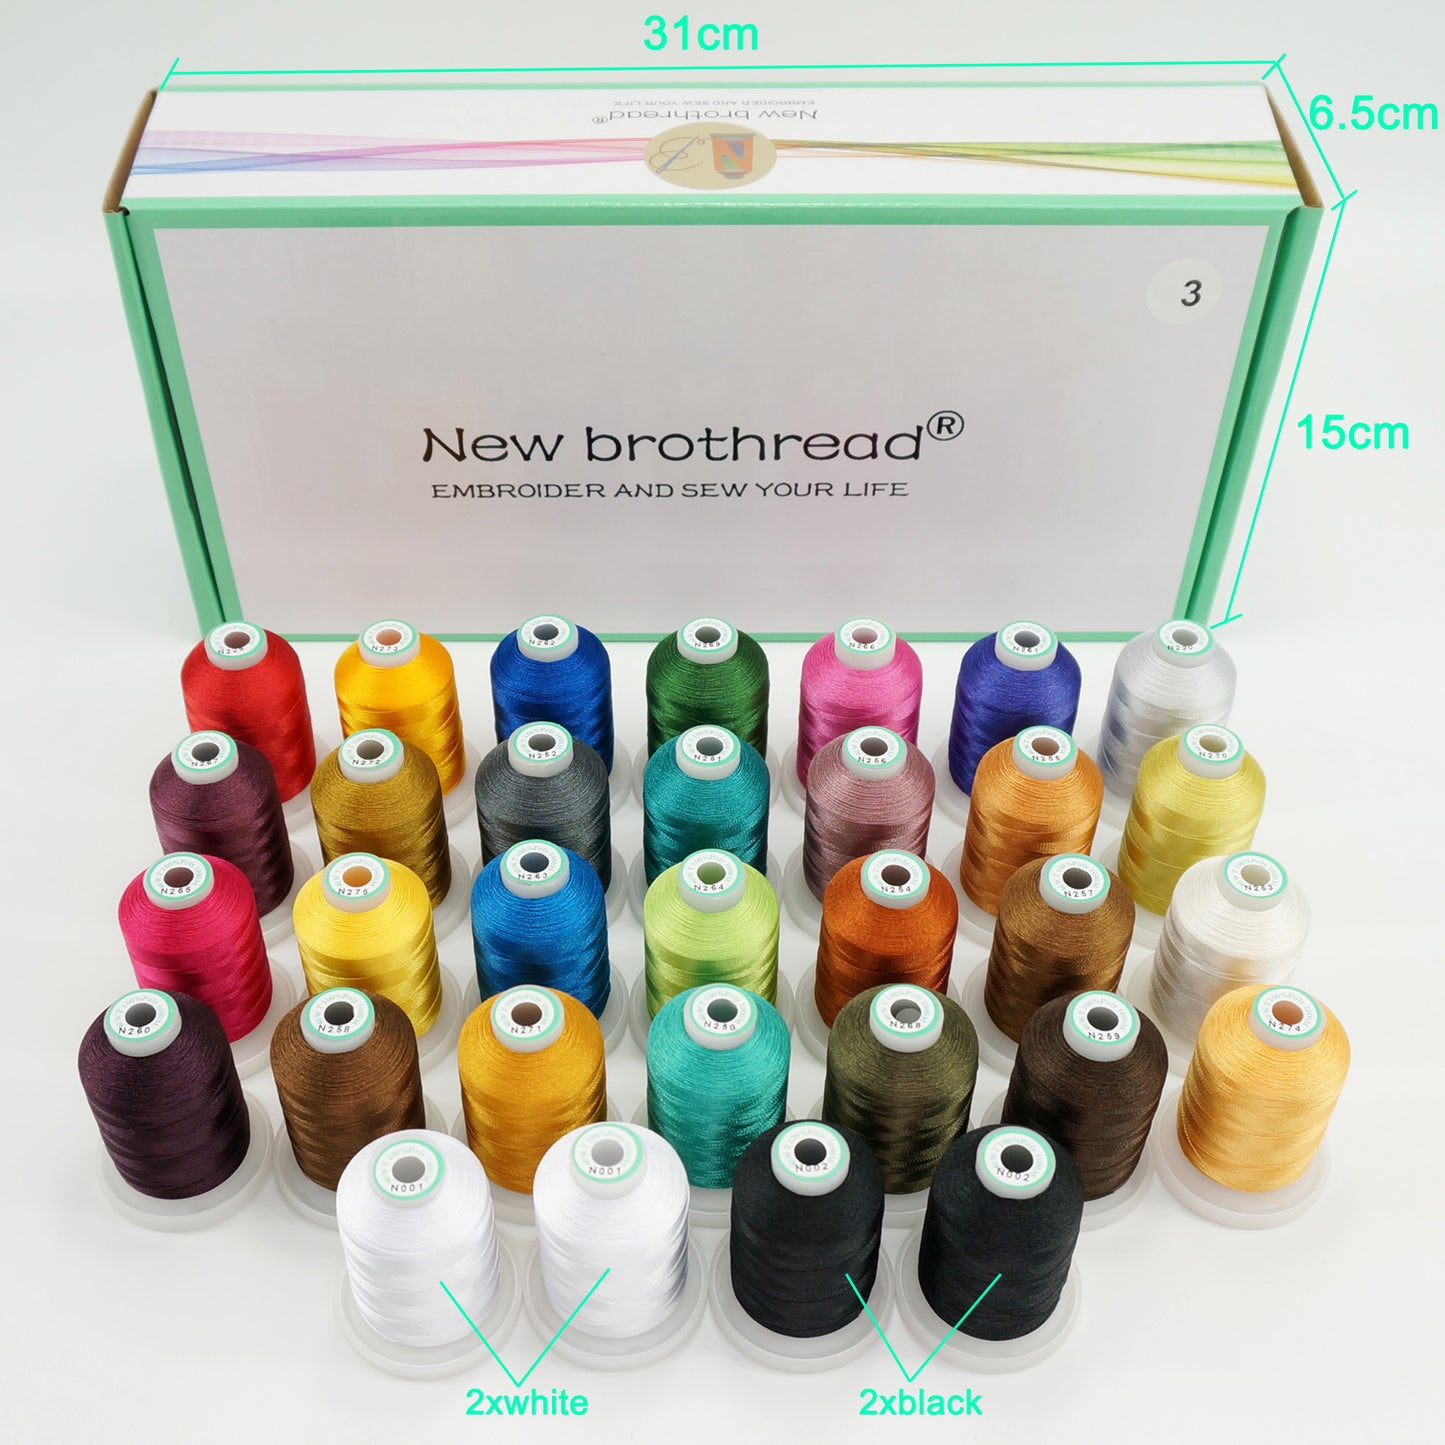 New brothread 32 Spools Polyester Embroidery Machine Thread Kit 1000M (1100Y) Each Spool - Colors Compatible with Janome and Robison-Anton Colors